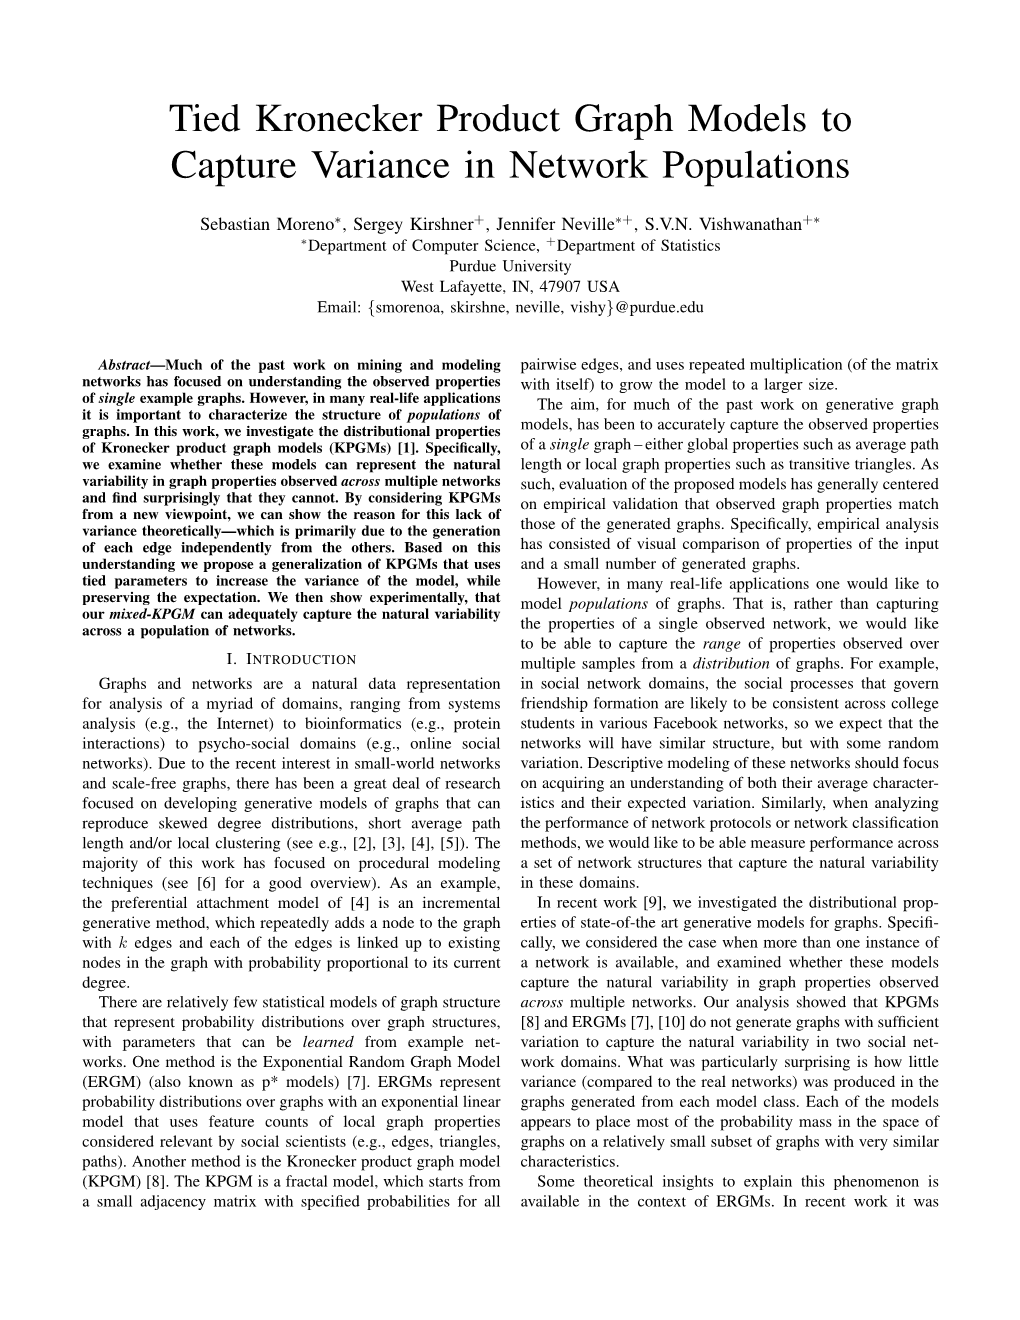 Tied Kronecker Product Graph Models to Capture Variance in Network Populations